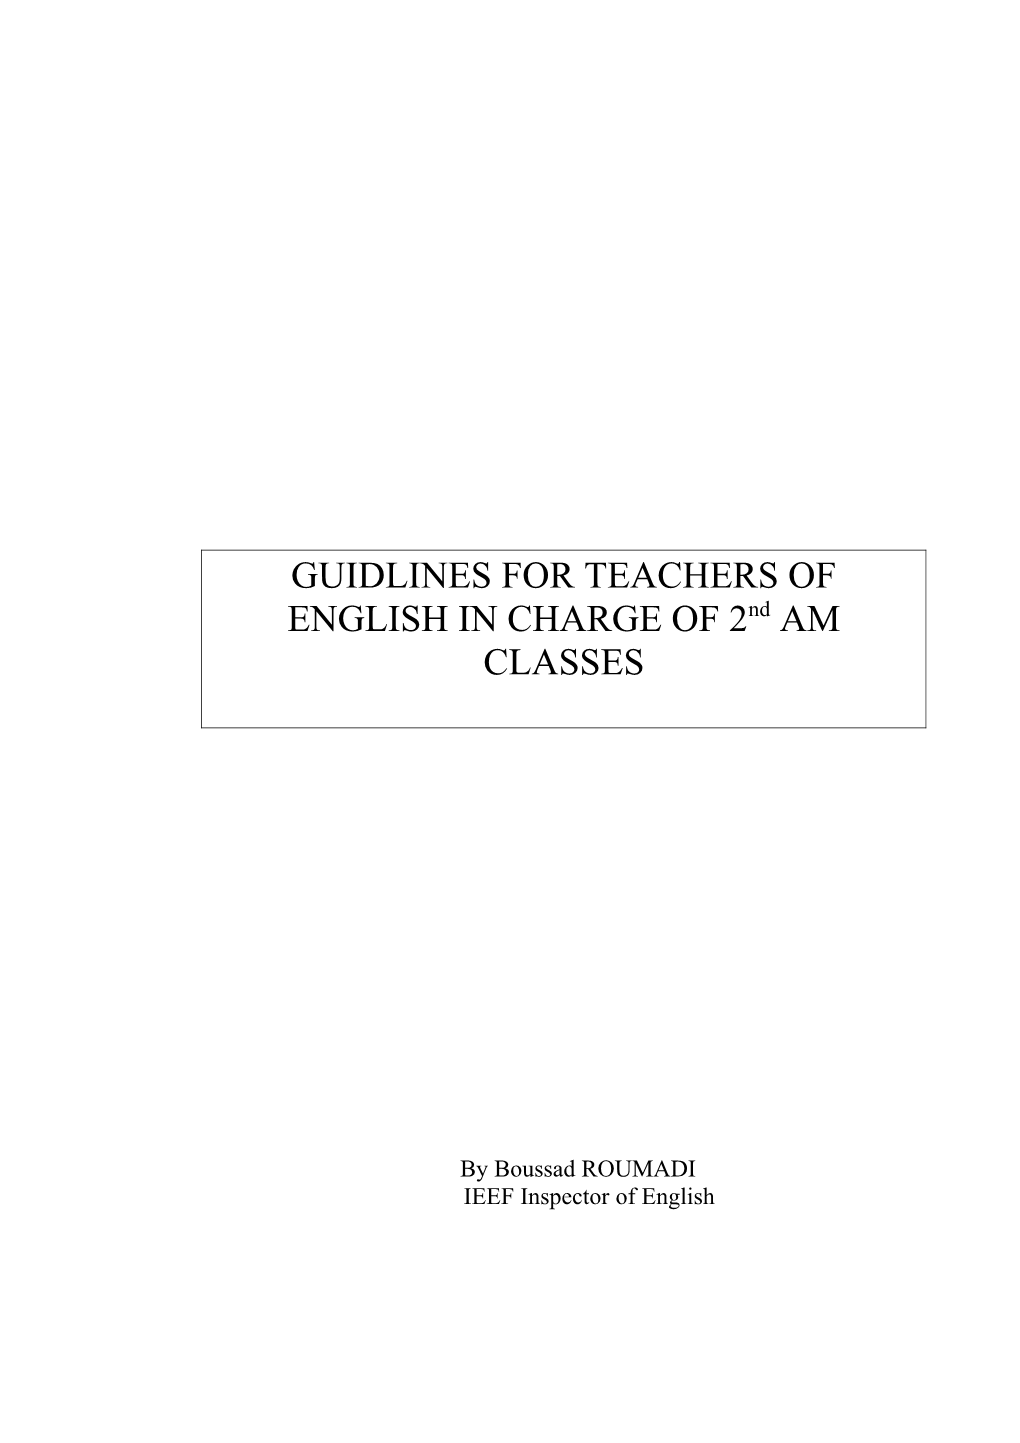 GUIDLINES for TEACHERS of ENGLISH in CHARGE of 2Nd AM CLASSES